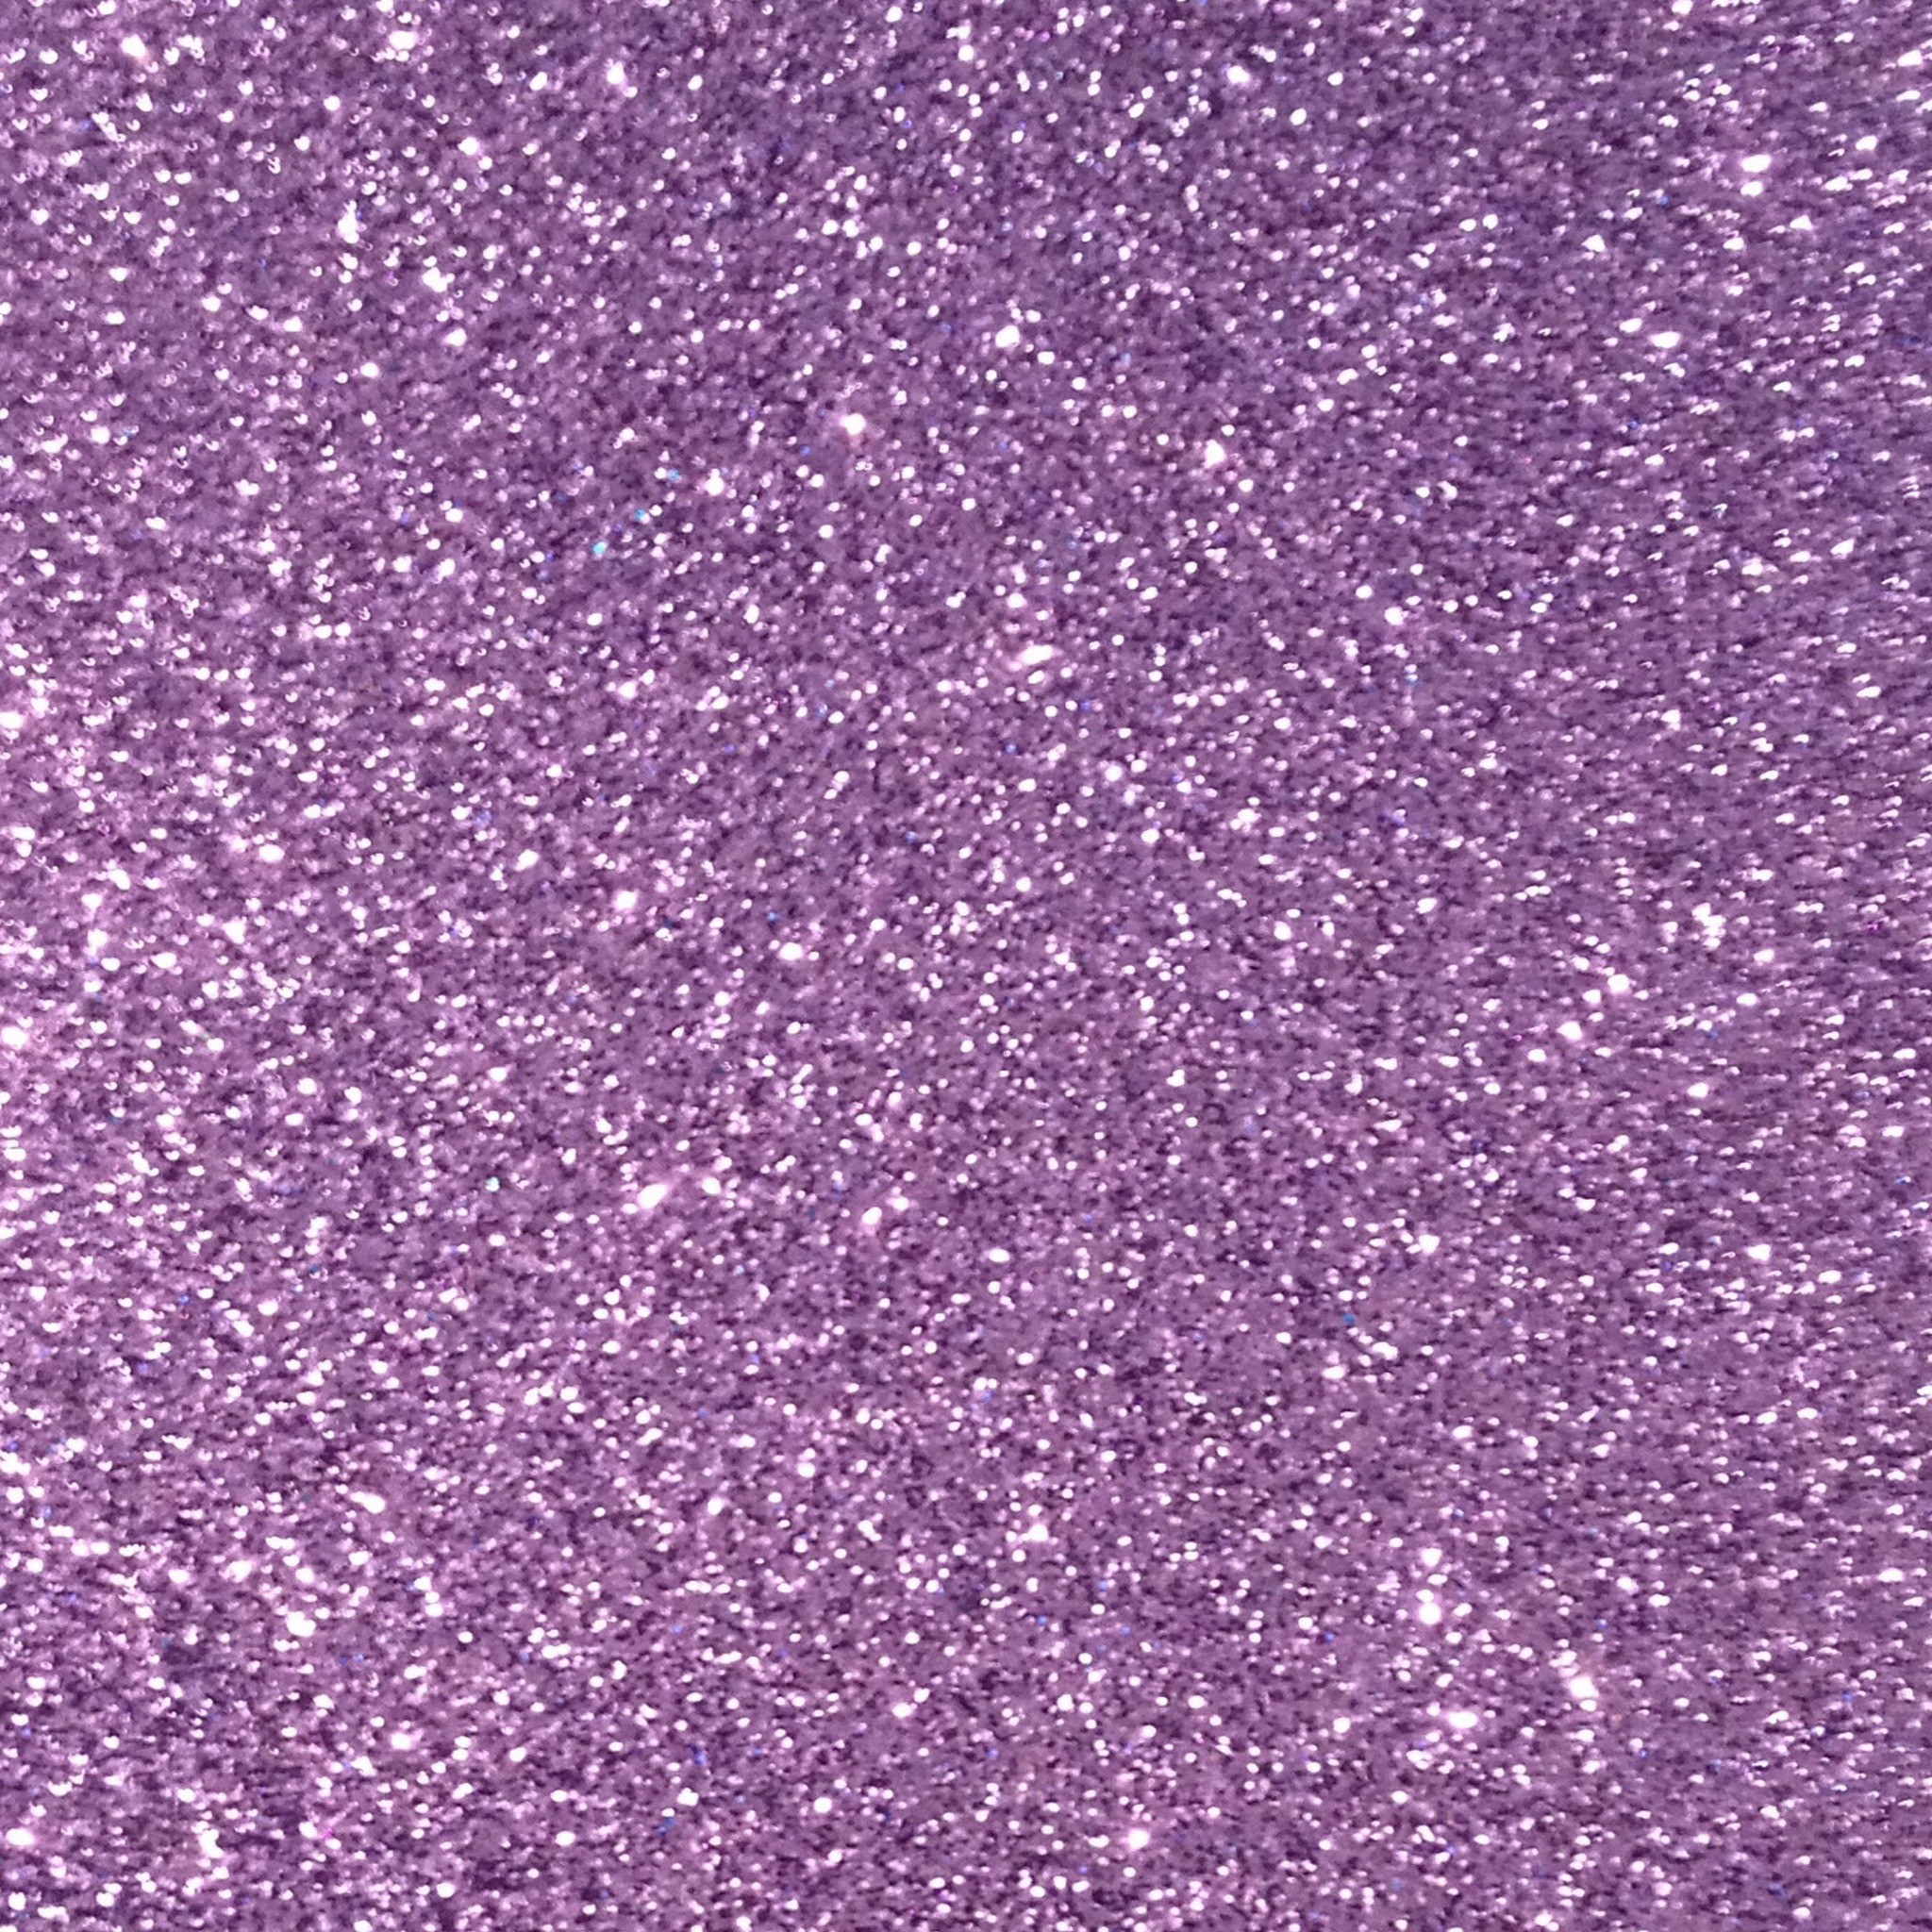 2048x2048 Violet Glitter. Tap image for more glitter wallpapers for iPhone, iPad &  Android!